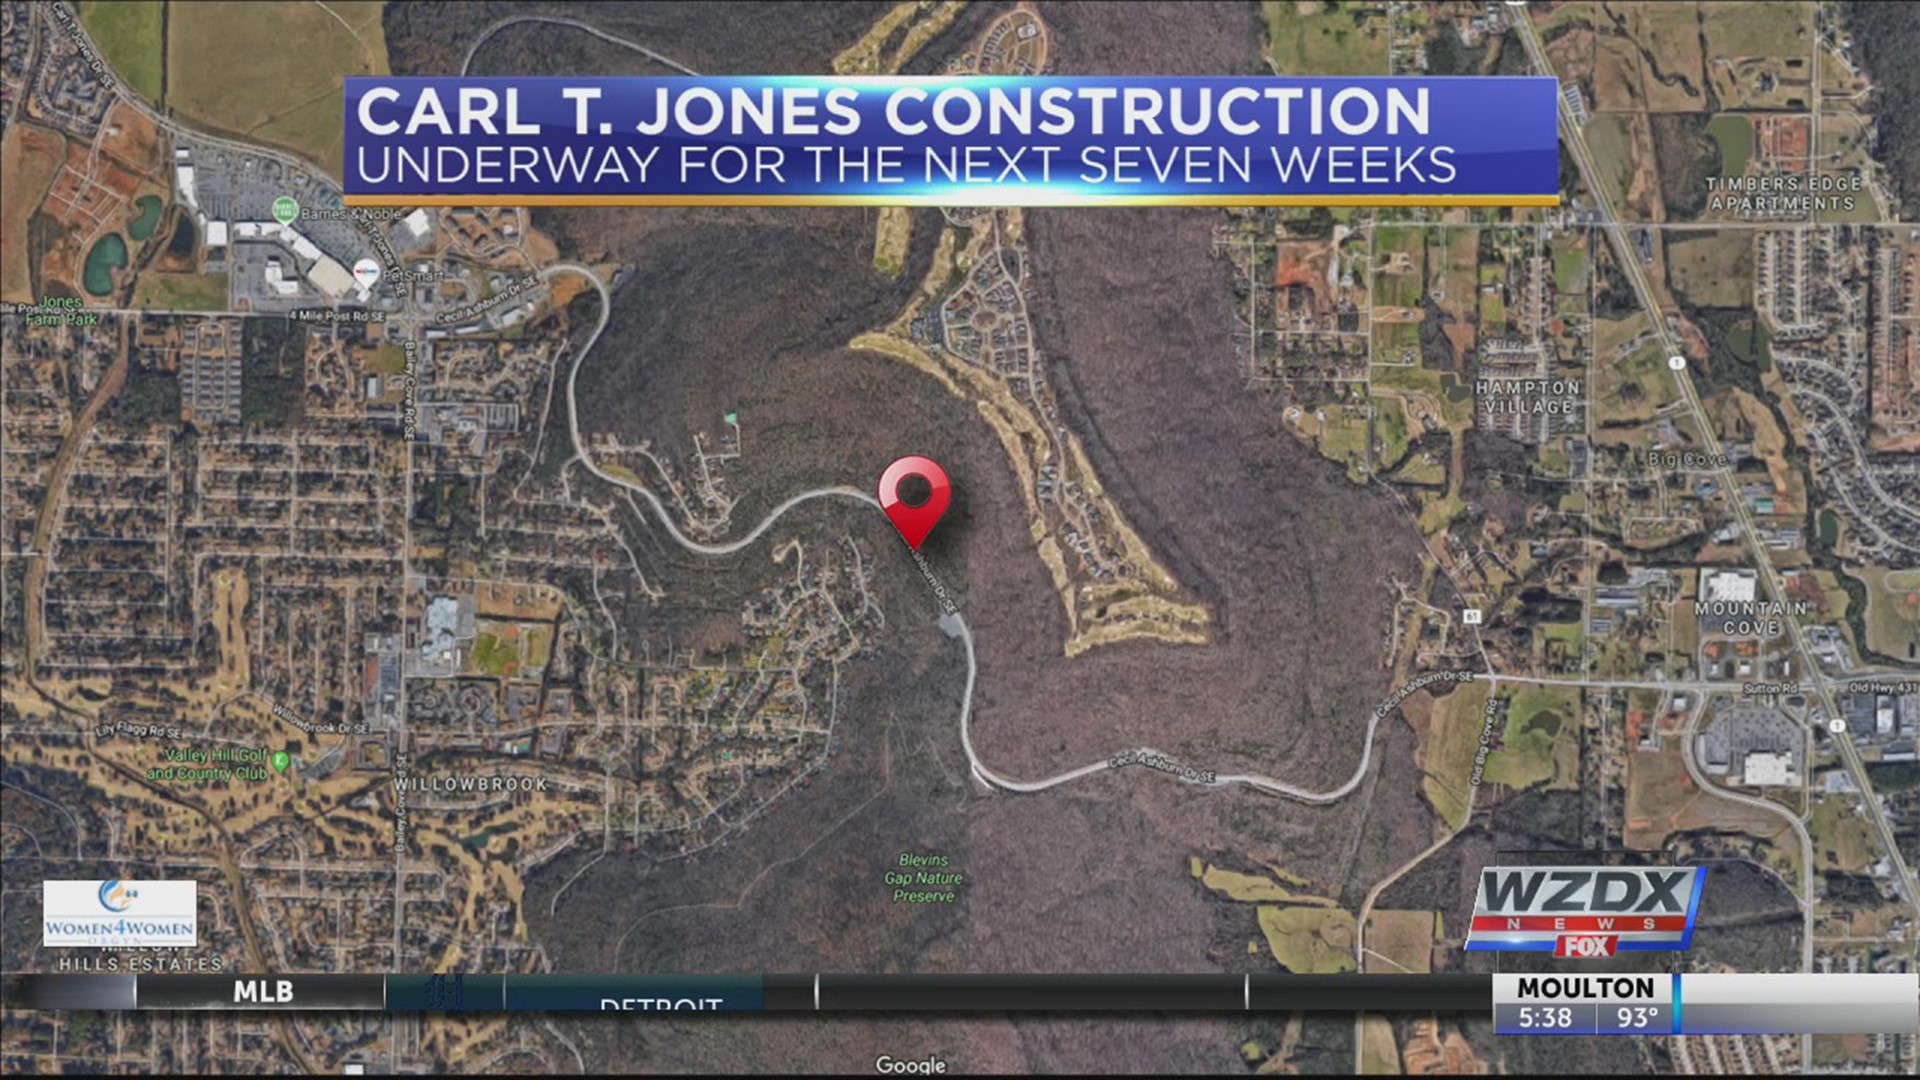 Carl T. Jones Drive from Whitesburg Drive to "Four Mile Post Road" will be under construction for the next seven weeks.